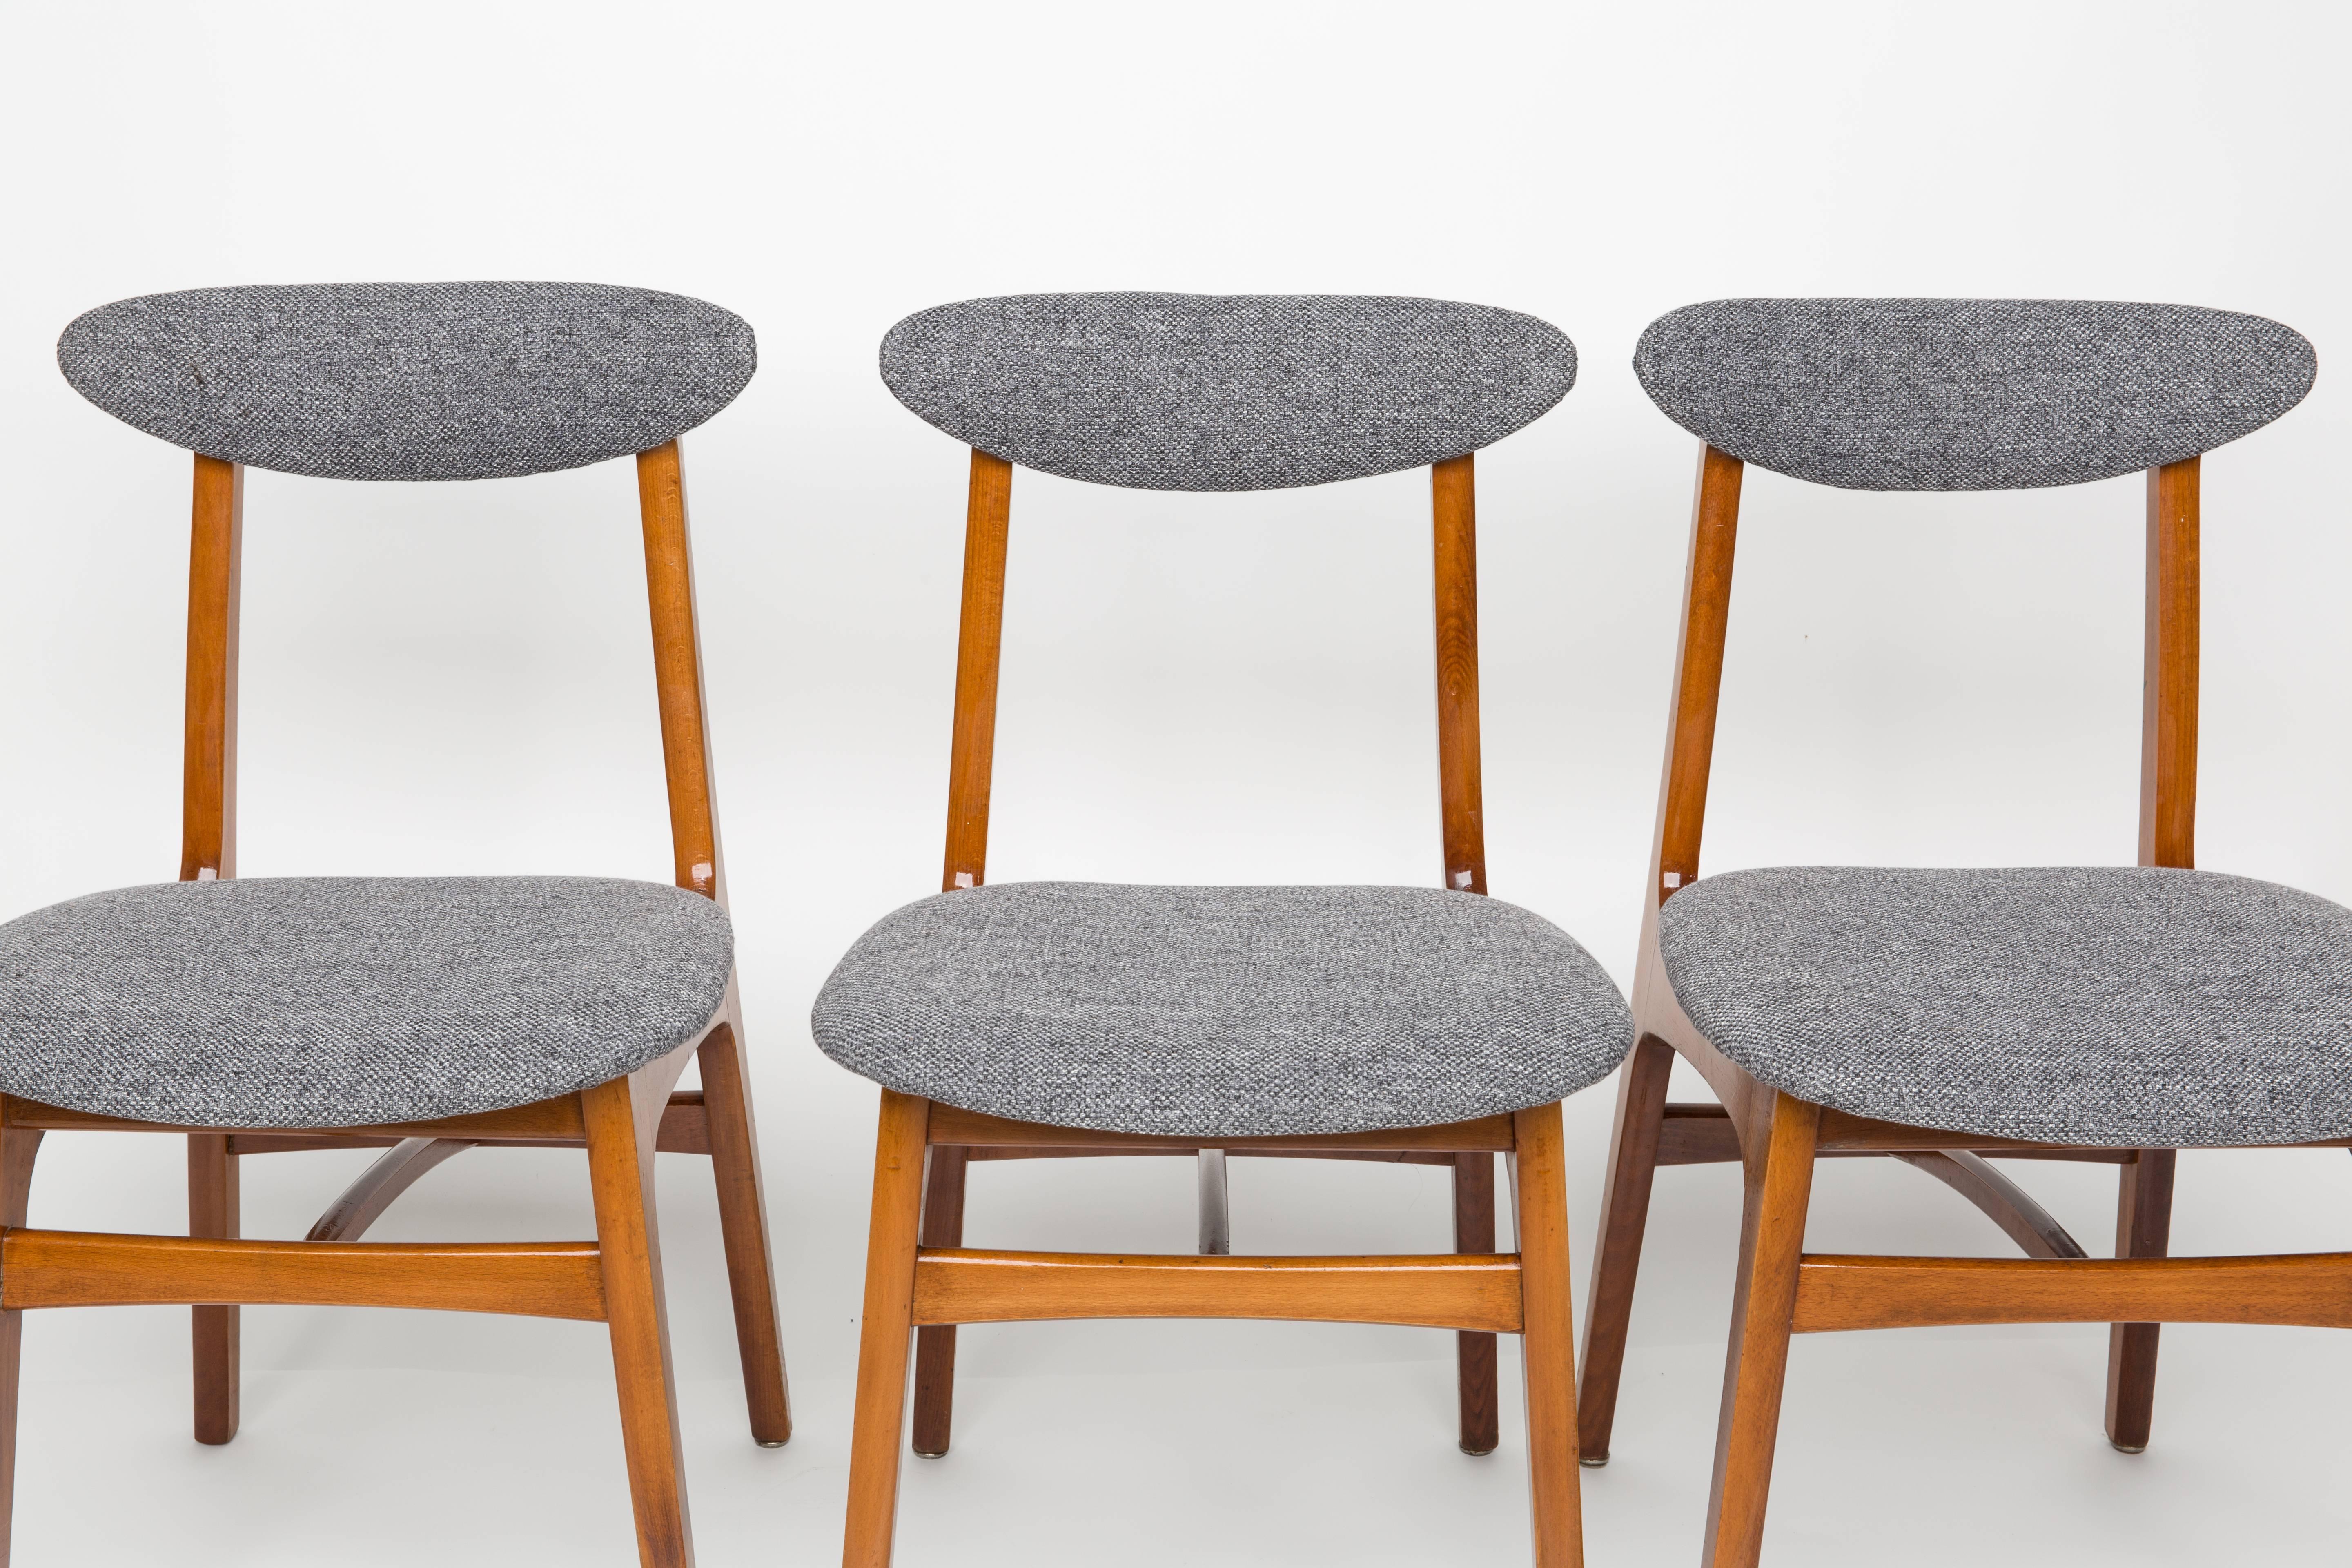 Chairs designed by prof. Rajmund Halas. They have been made of beech wood. They have undergone a complete upholstery renovation, the woodwork has been refreshed. Seats and backs were dressed in a gray, durable and pleasant to the touch fabric. They